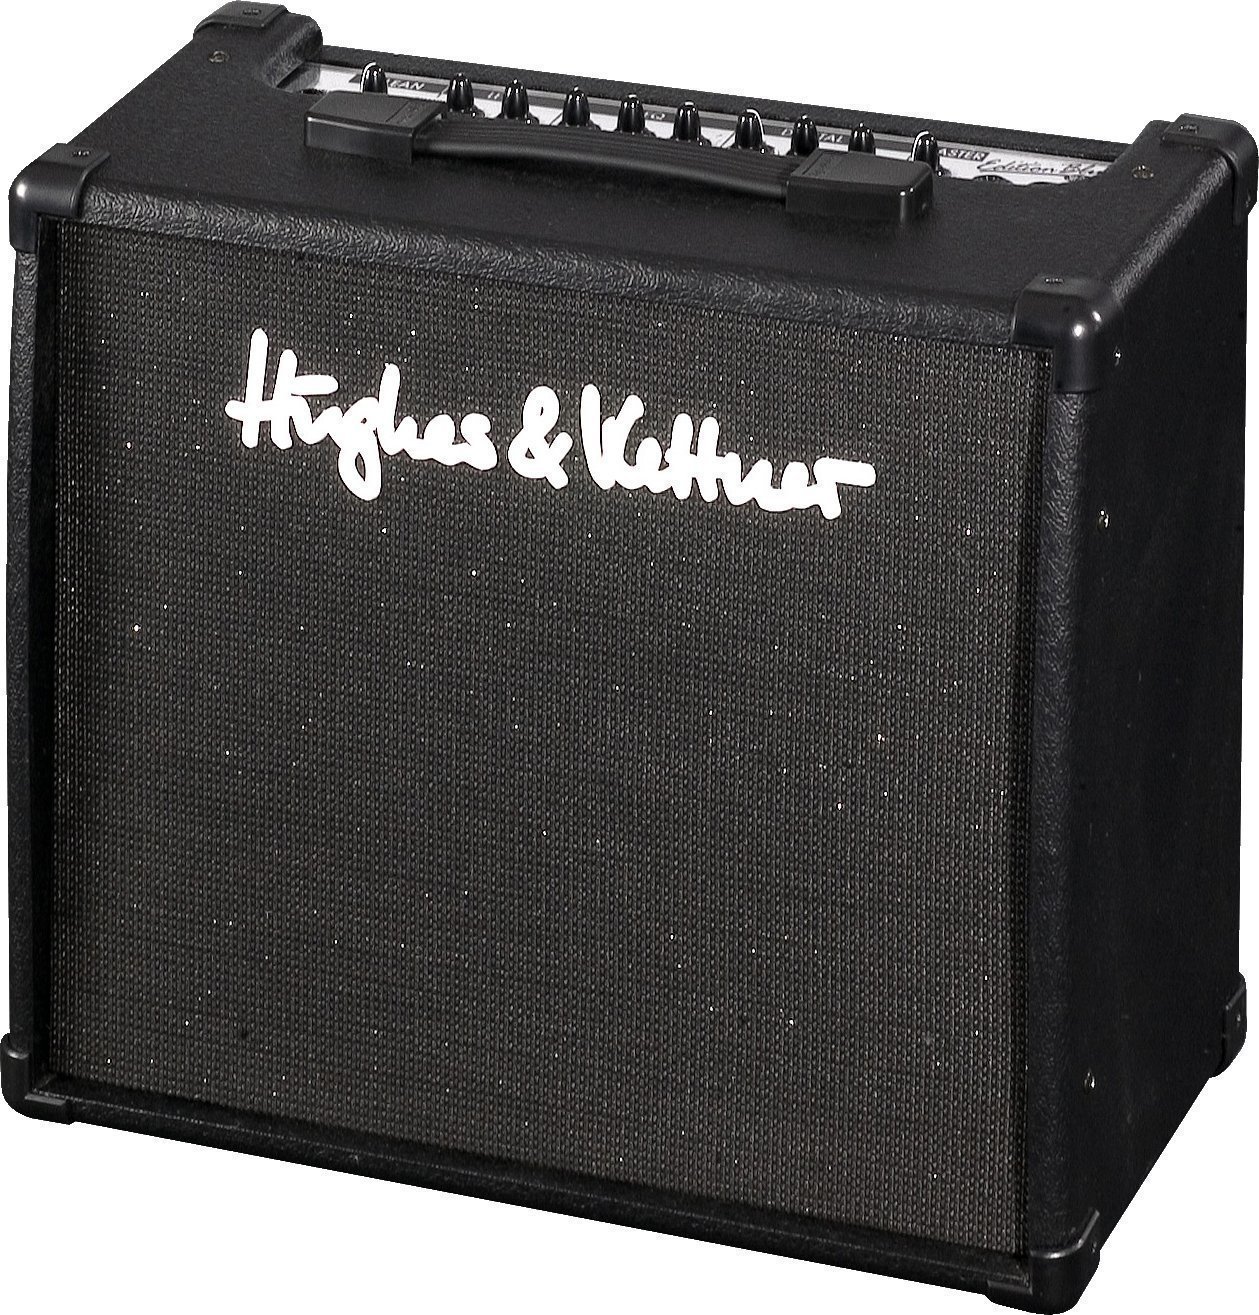 Solid-State Combo Hughes & Kettner Edition Blue 30 R